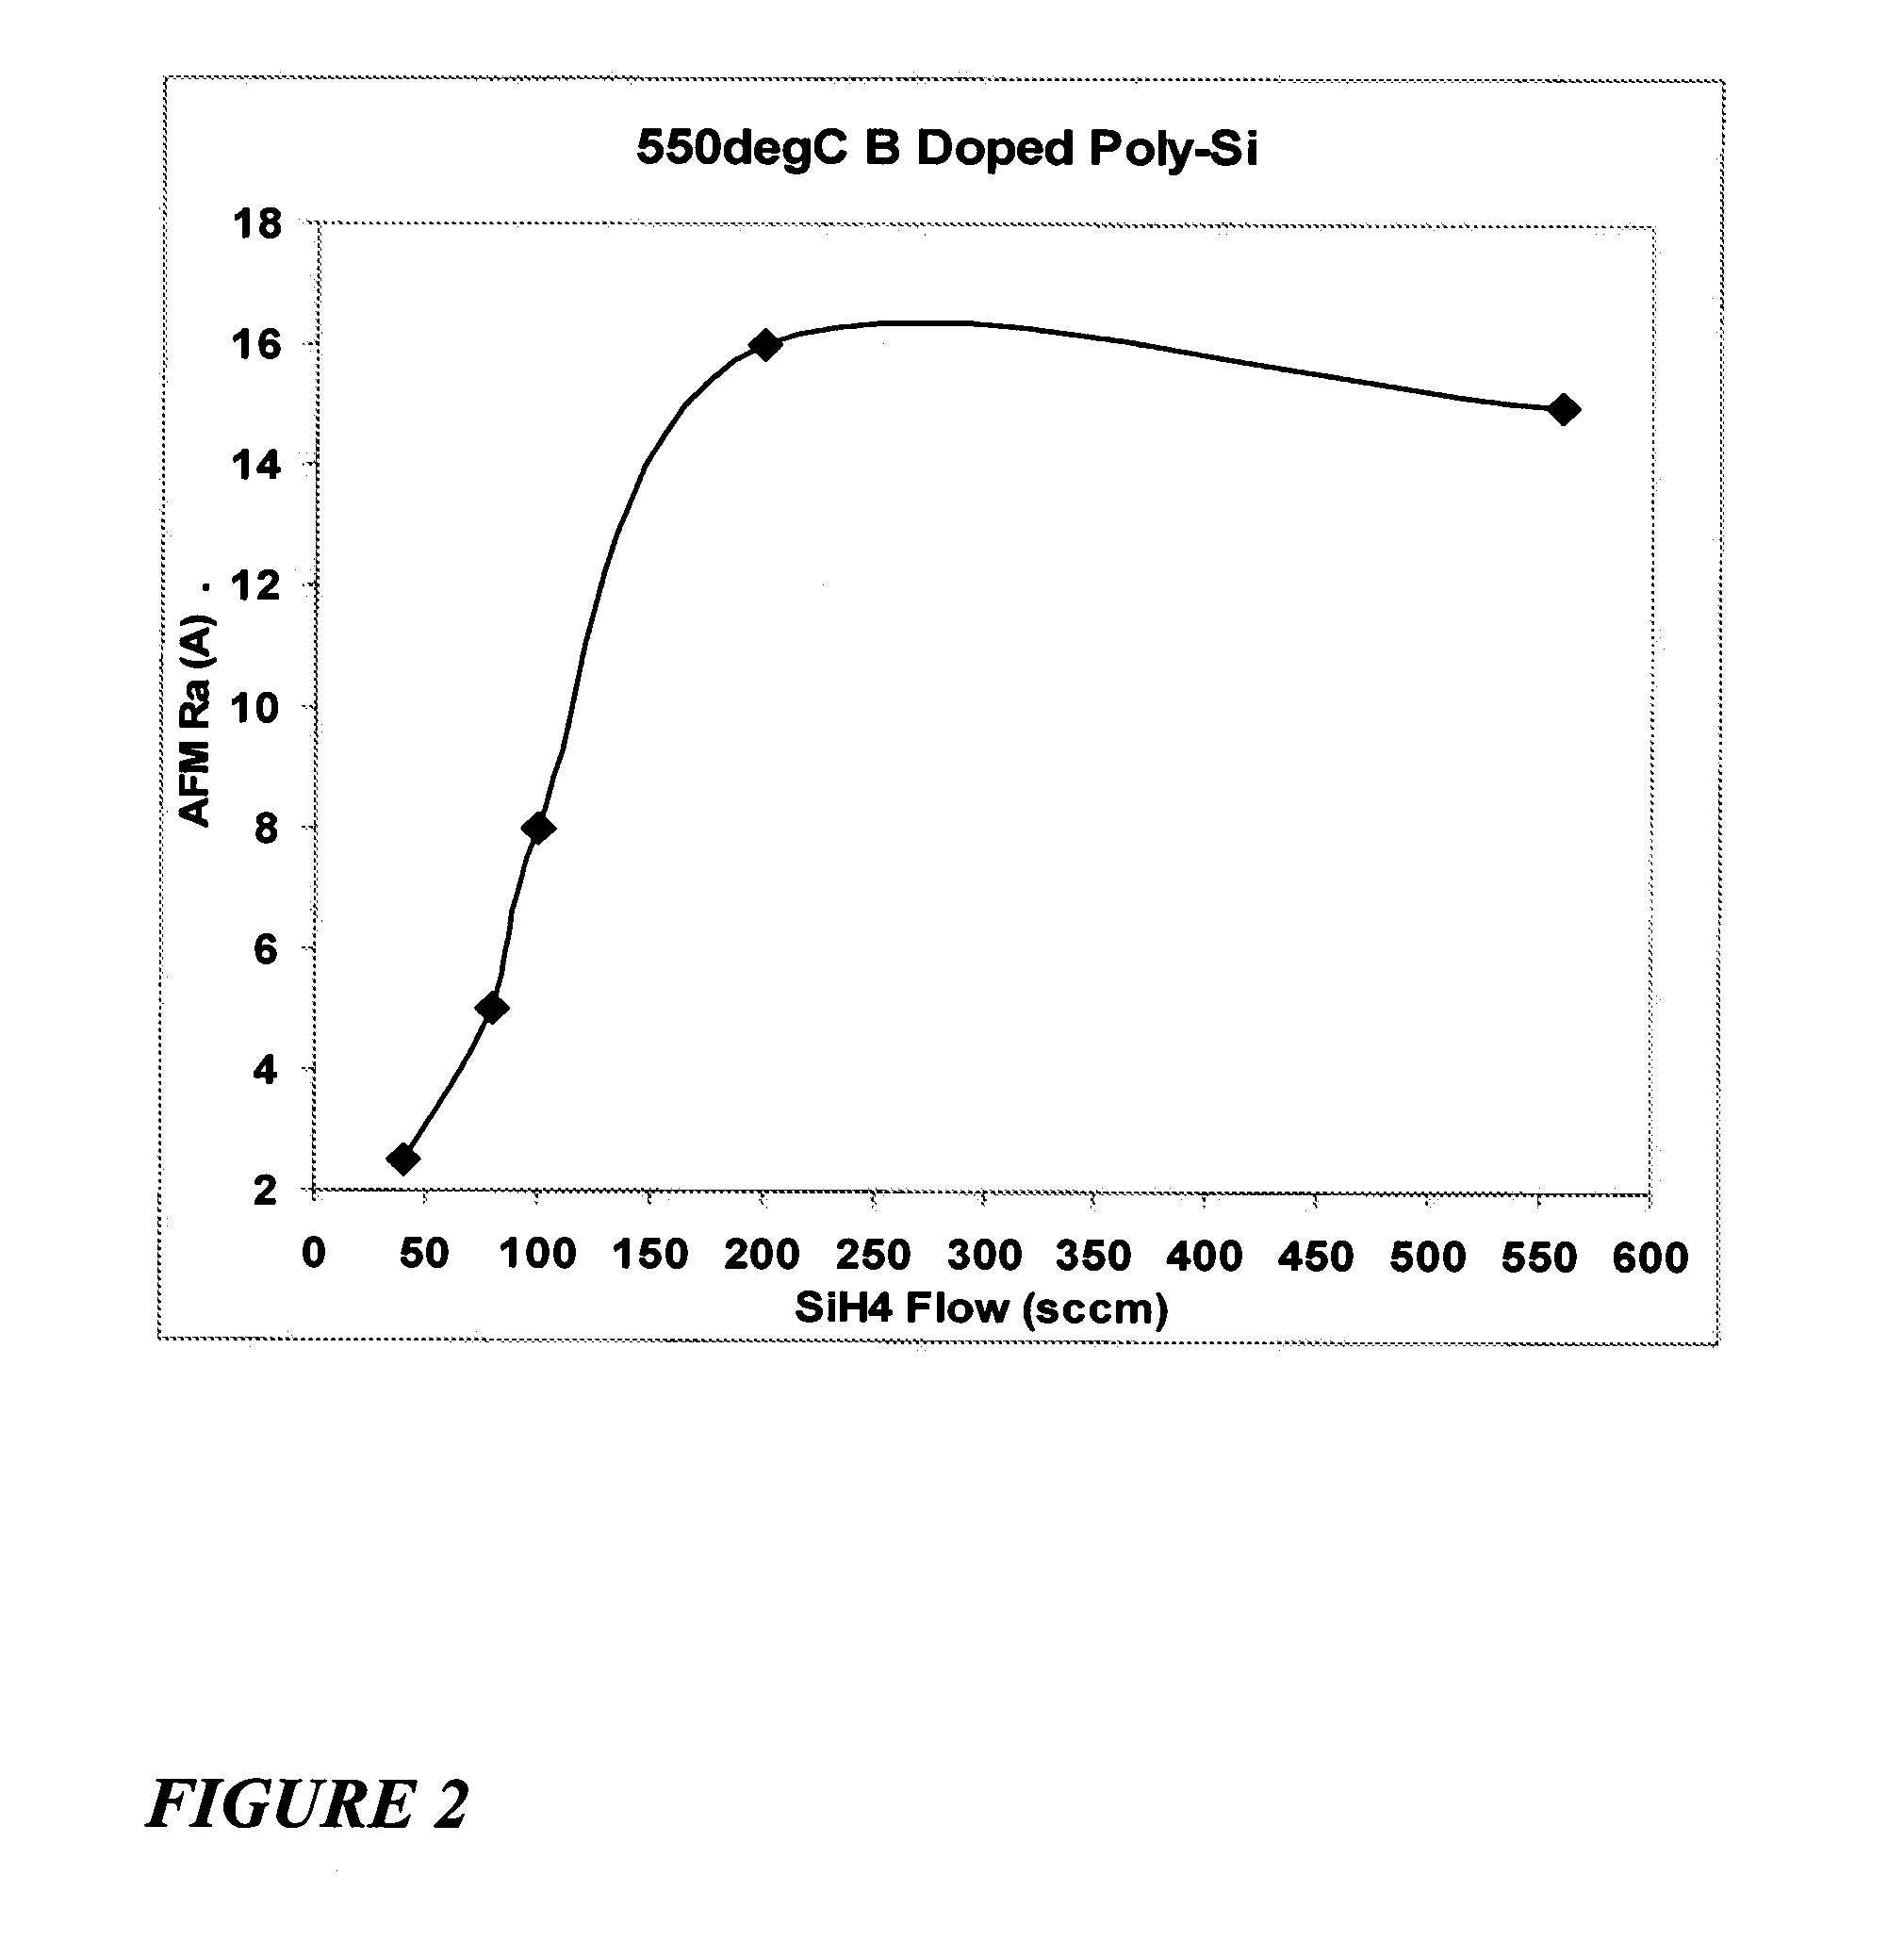 Pecvd deposition of smooth polysilicon films